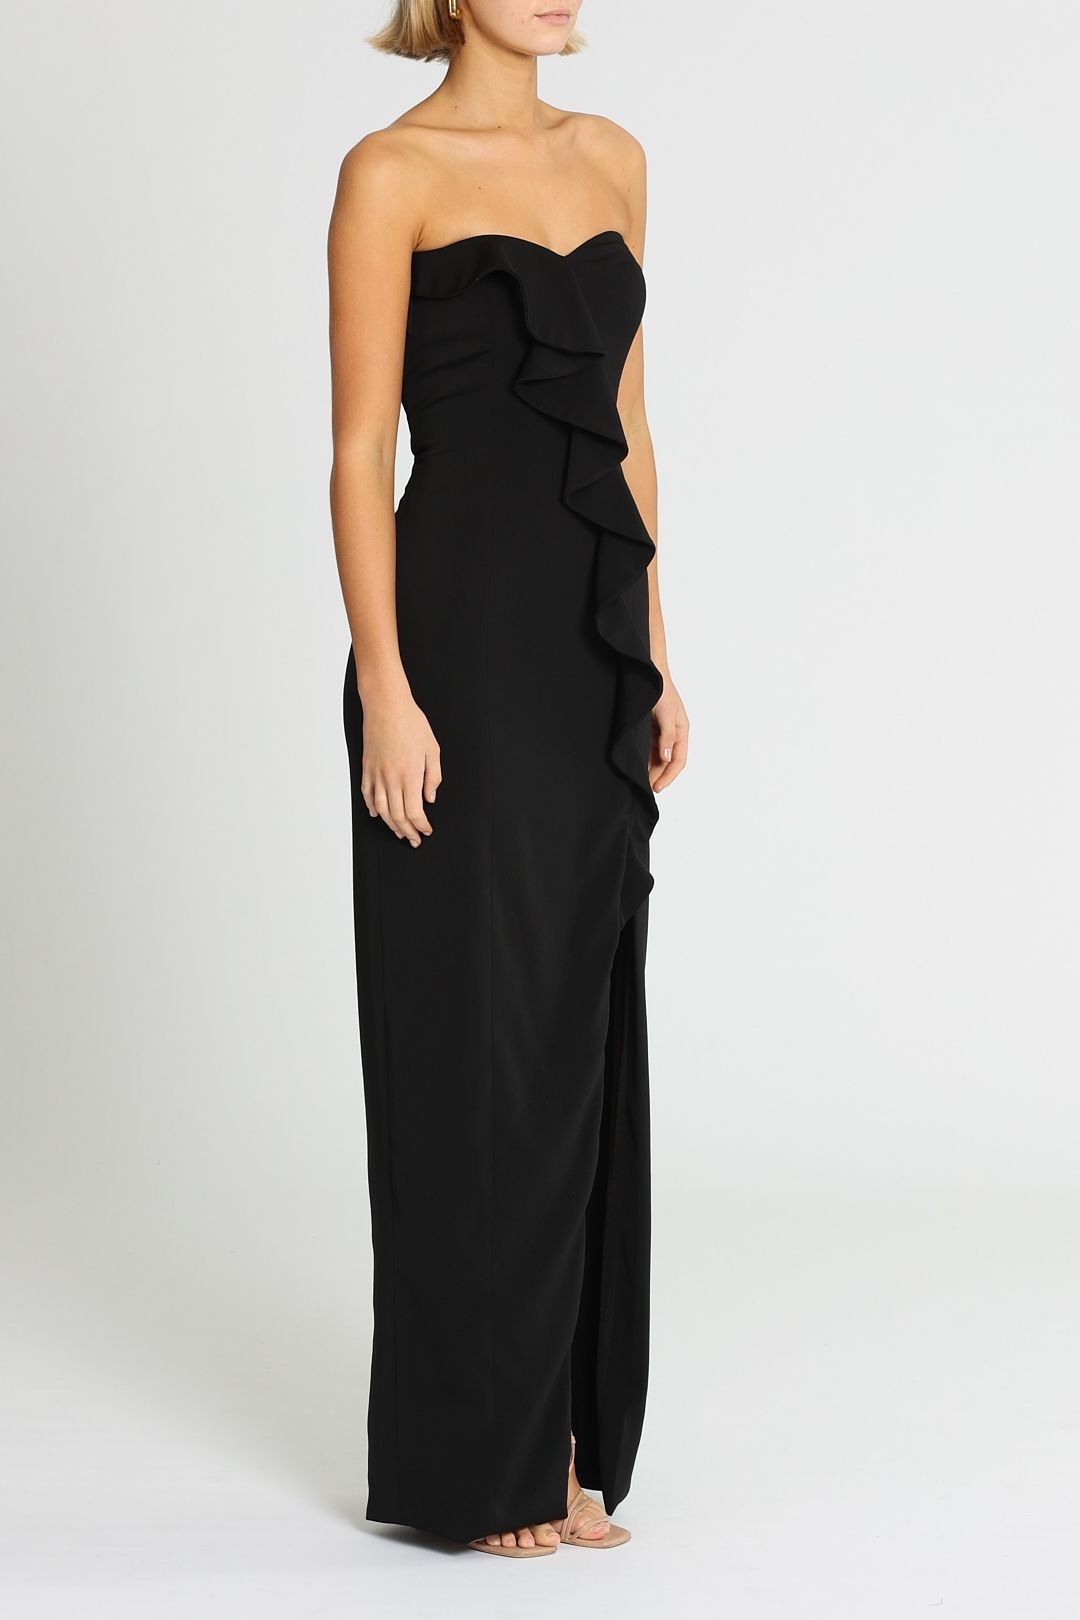 Varys Strapless Ruffle Gown by Jay Godfrey for Hire